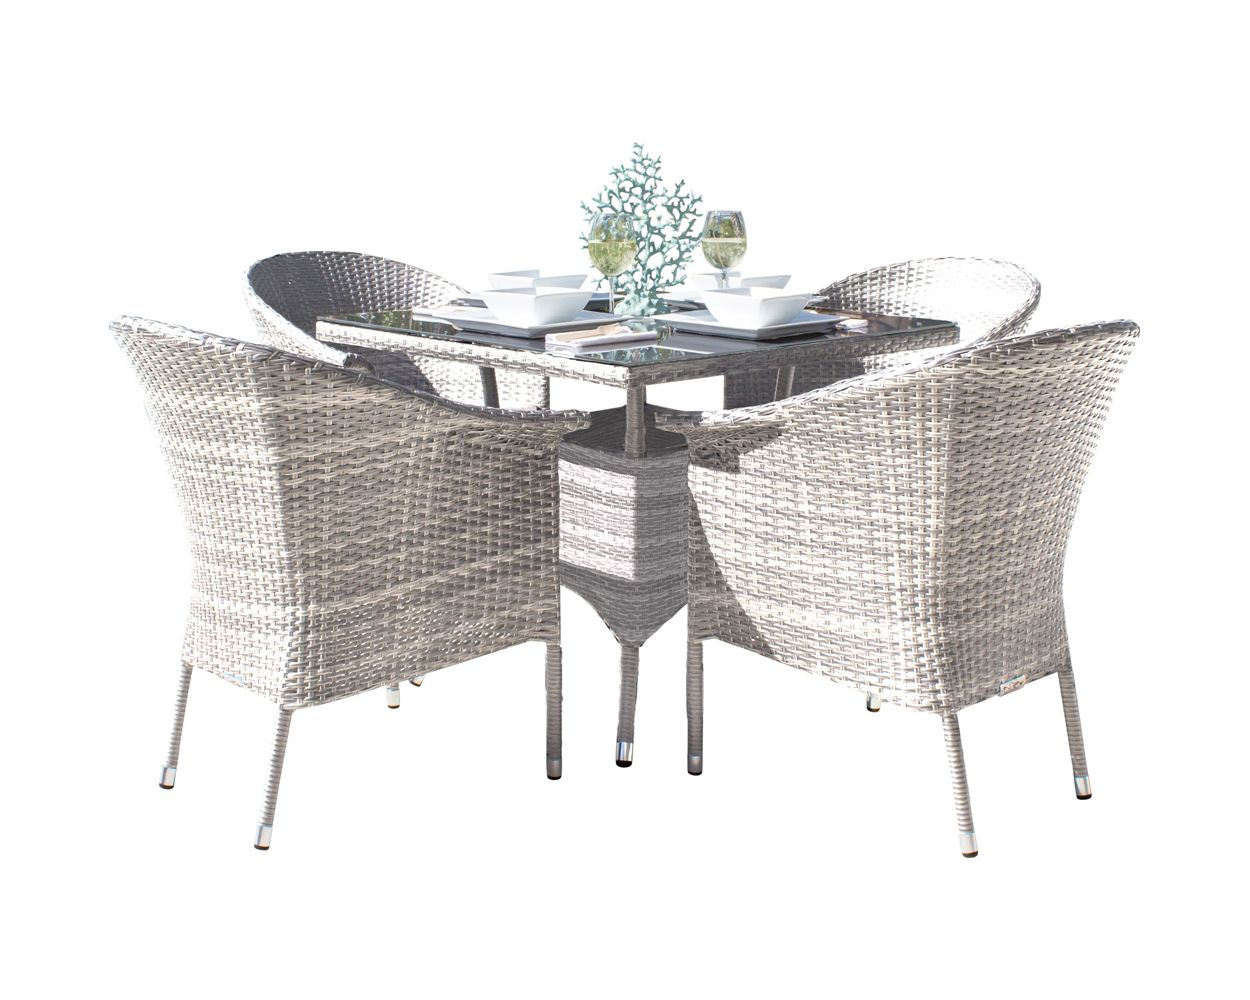 Hospitality Rattan Athens 5-Piece Woven Armchair Dining Set with Cushions